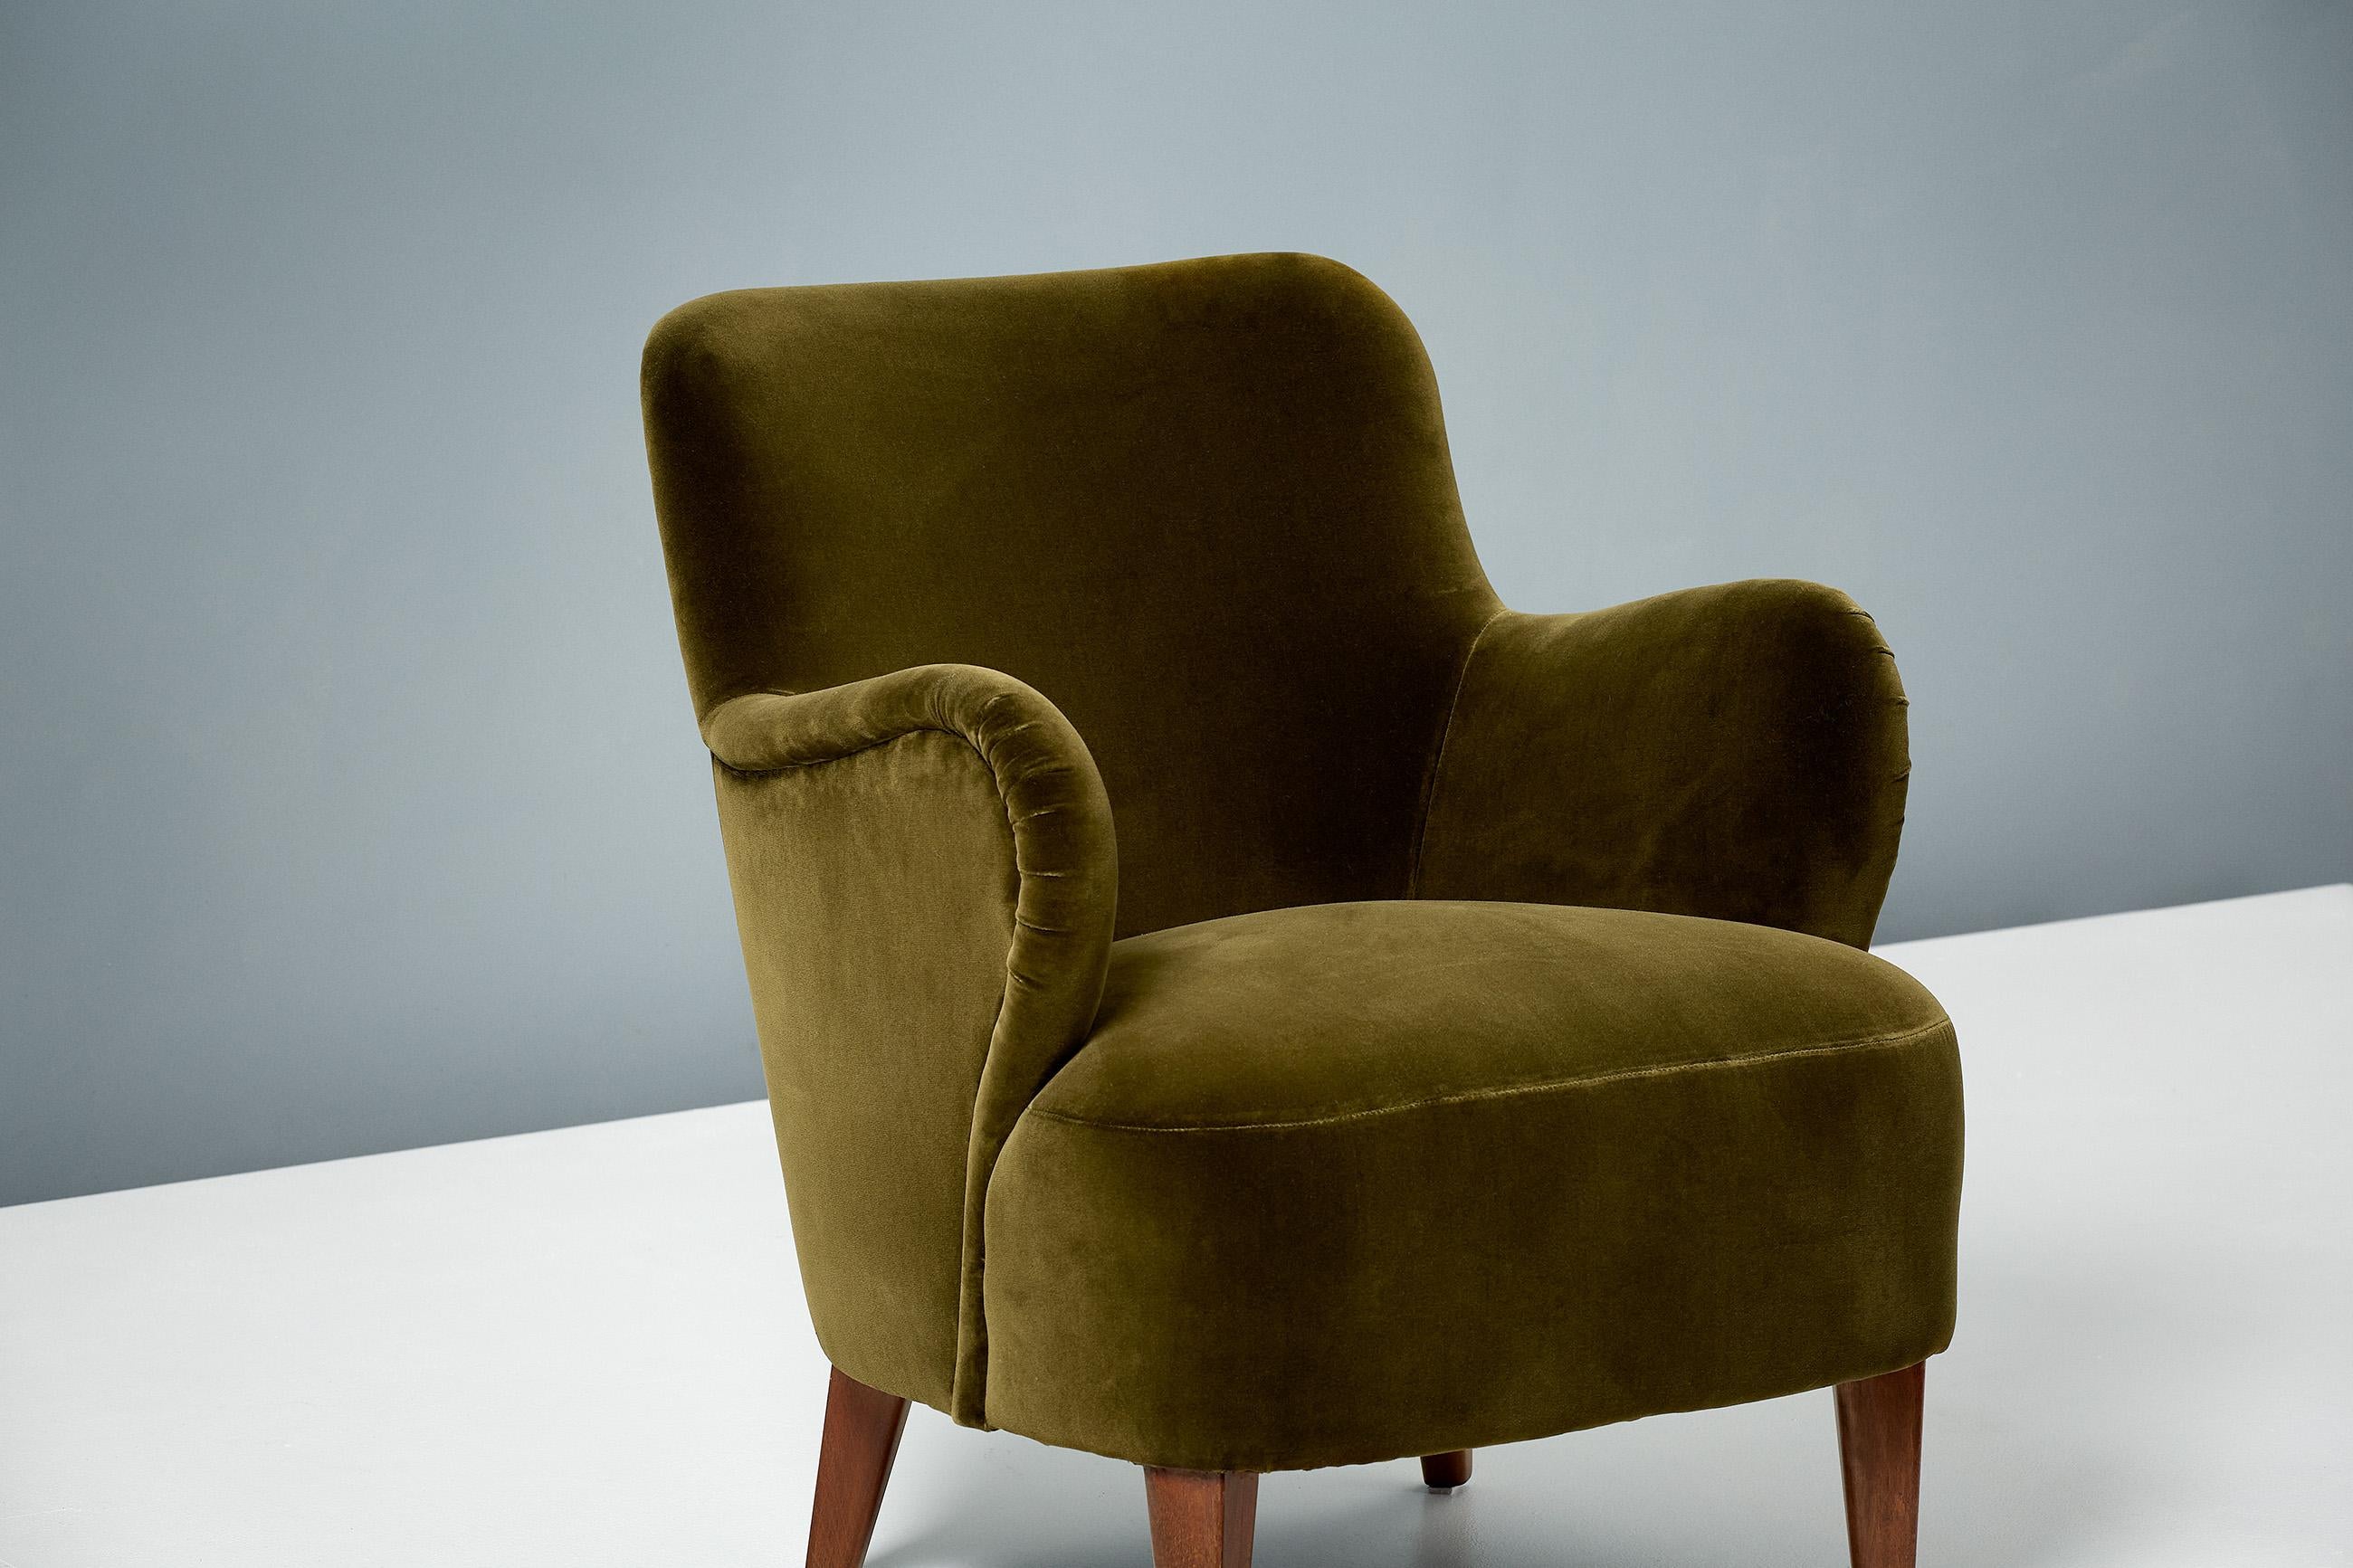 A pair of armchairs designed by Carl Malmsten in 1950s and produced in Sweden. This pair have been reupholstered in Rose Uniacke's 'Moss' deep green cotton velvet. The legs are stained elm wood.

